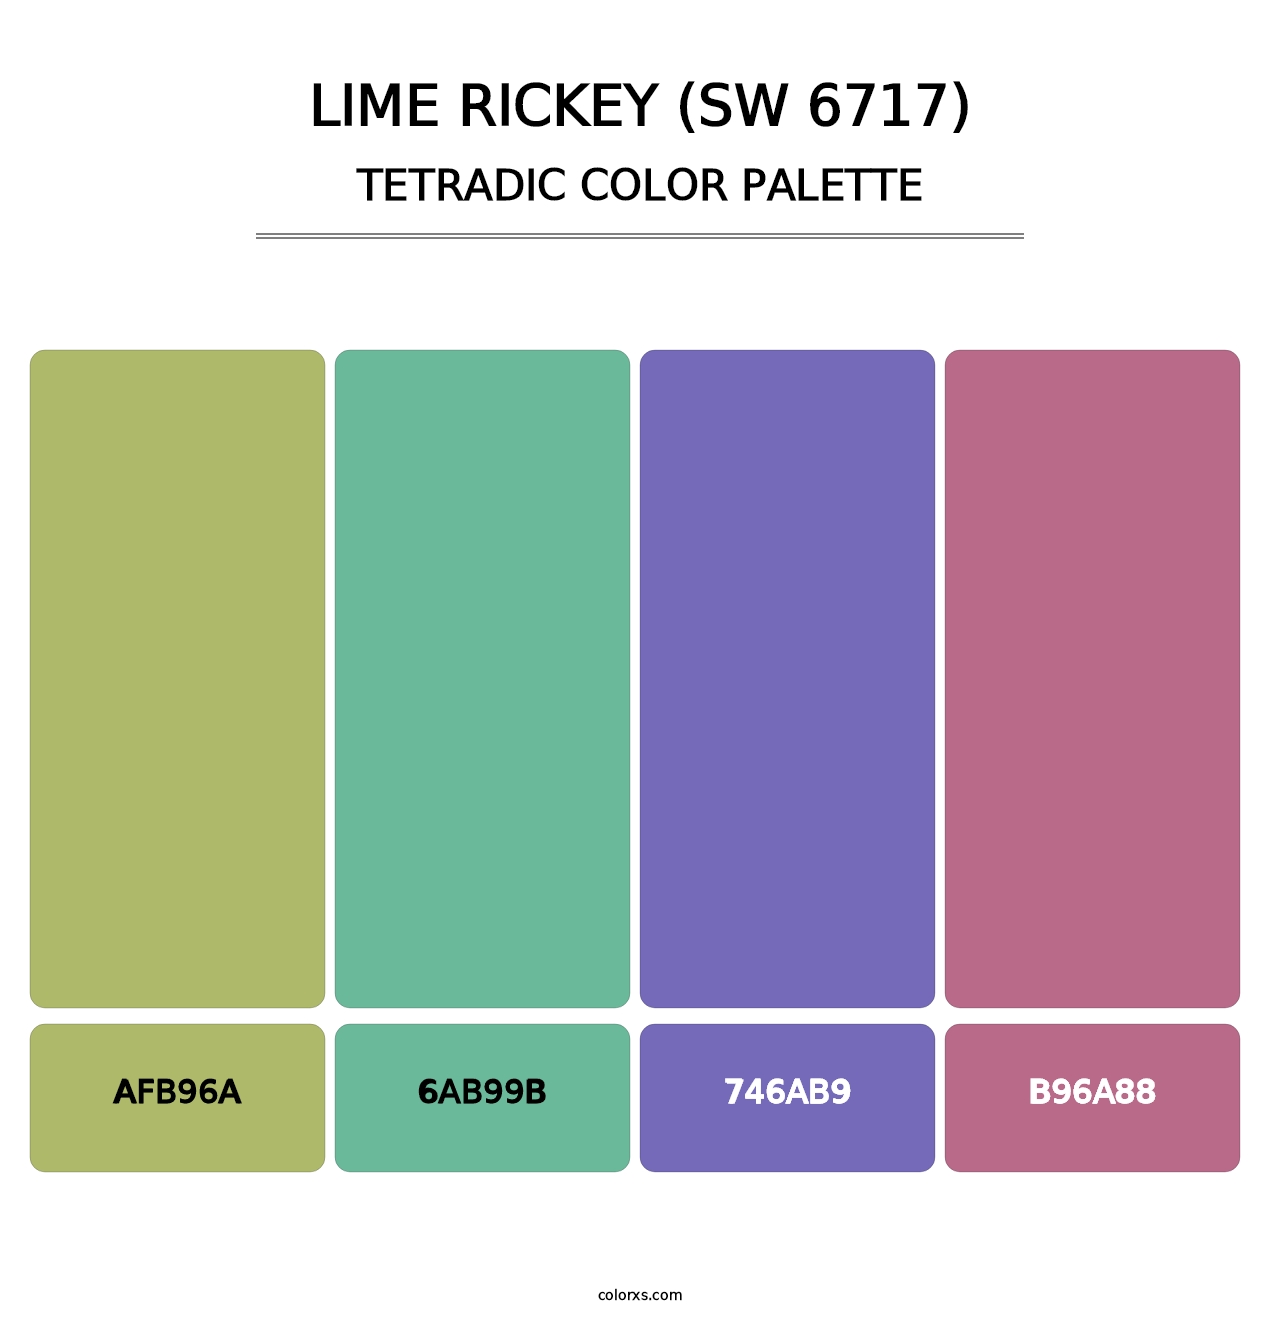 Lime Rickey (SW 6717) - Tetradic Color Palette